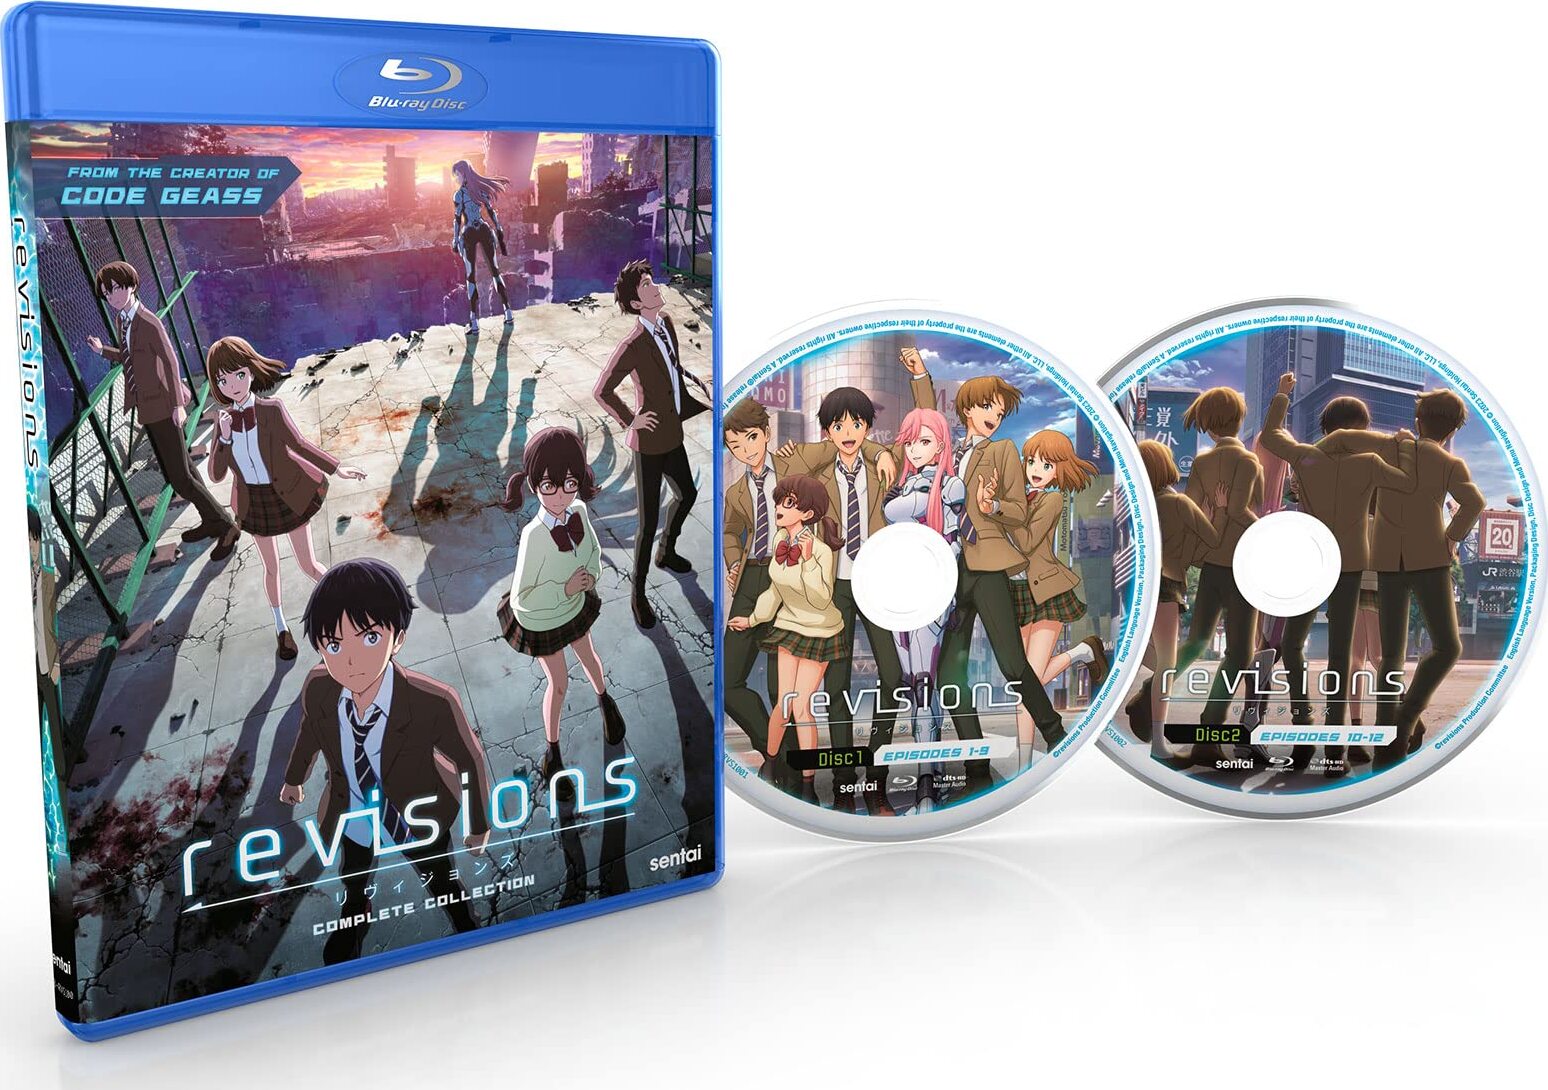 Revisions: Complete Collection Blu-ray